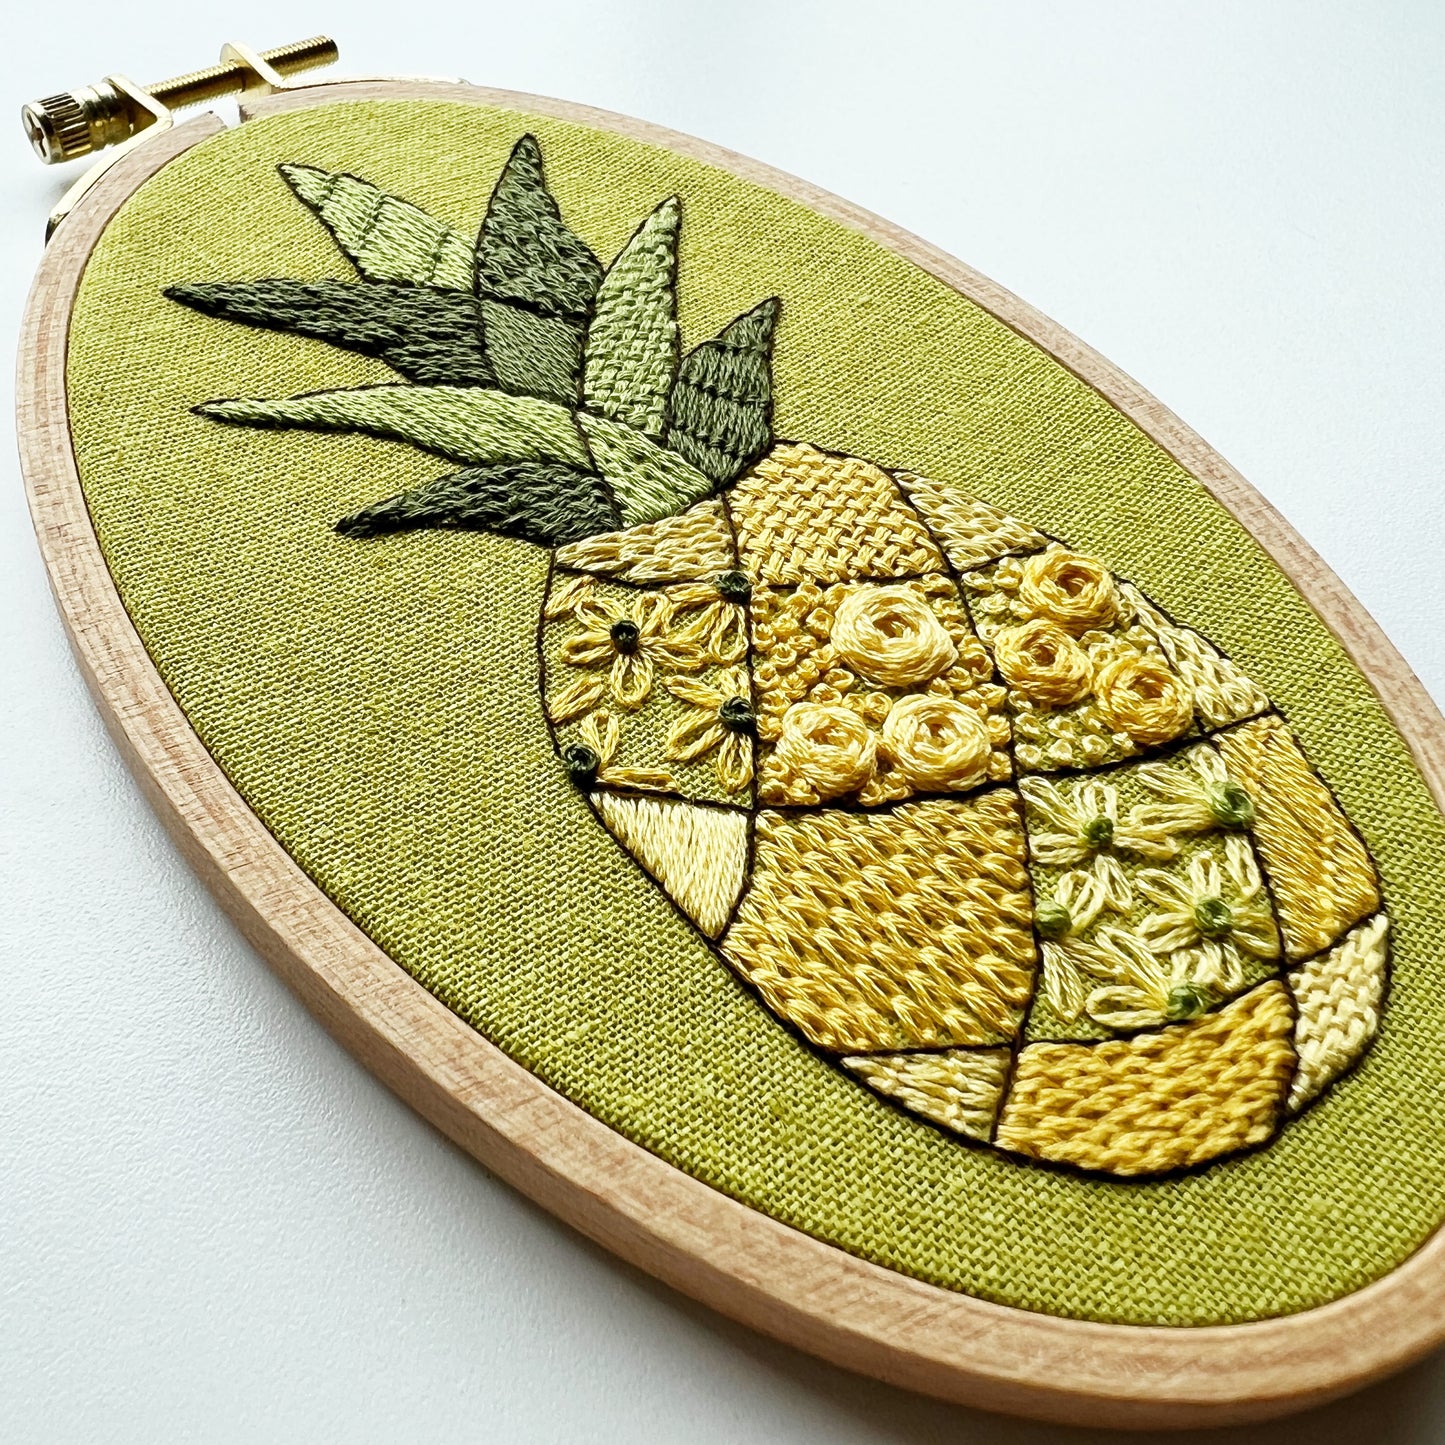 Patchwork Pineapple: Intermediate Embroidery Kit